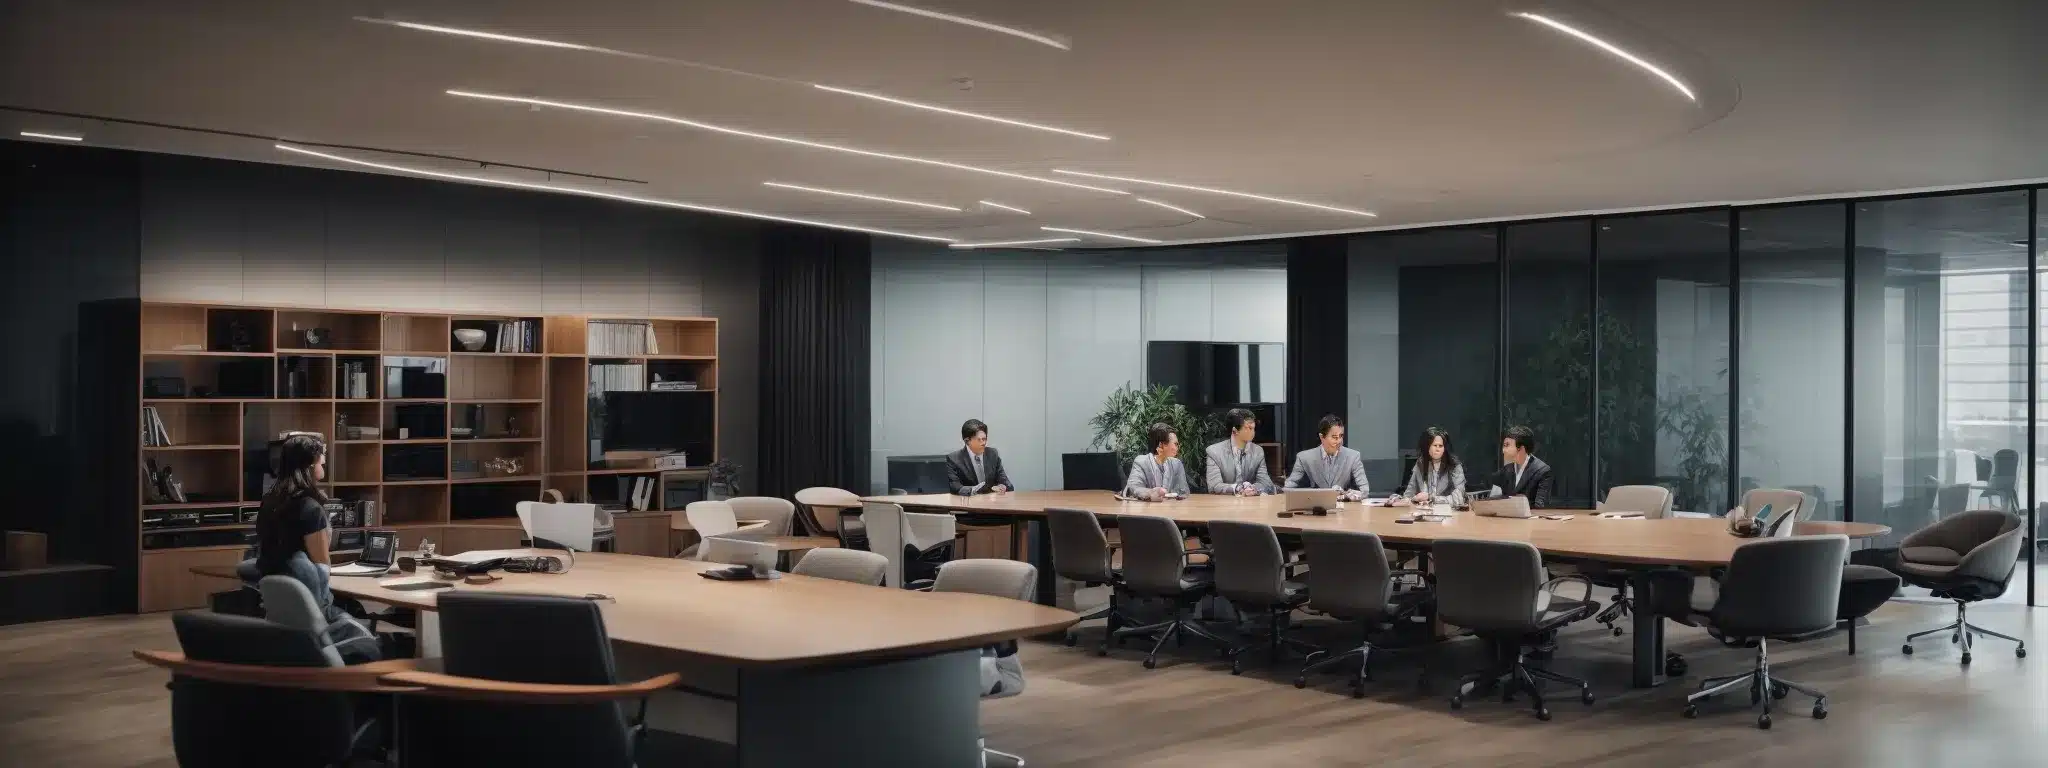 A Sleek Modern Office With Teams Engaged Around A Central Conference Table, Immersed In Collaborative Discussion.